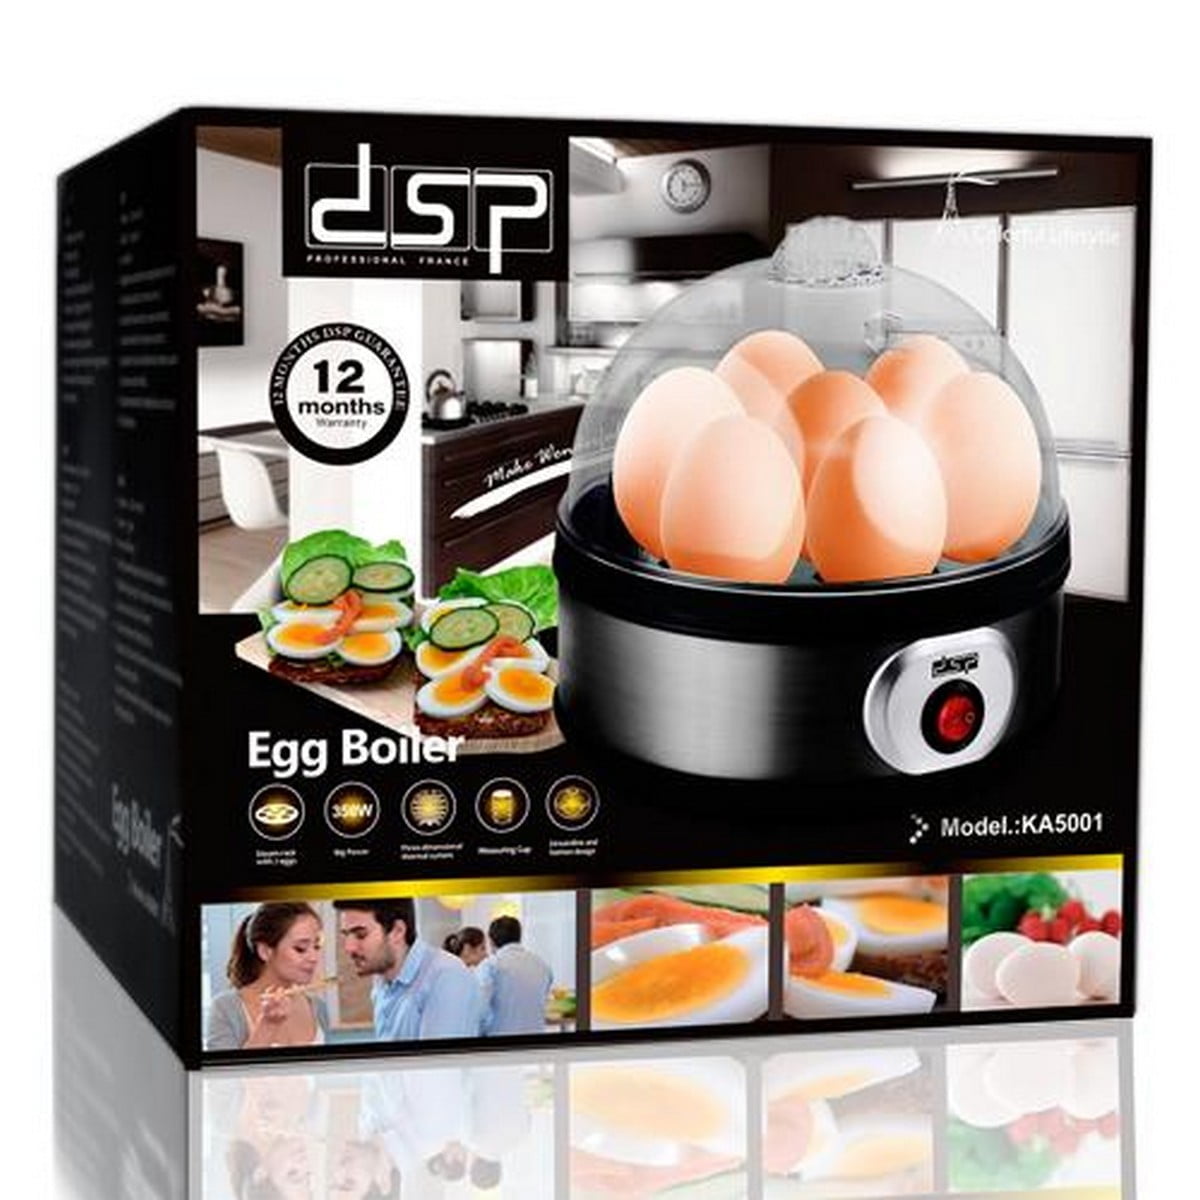 075B5C816E6Bceb391F2Ca2B6419848E Dsp &Lt;H1&Gt;Dsp Professional Egg Boiler&Lt;/H1&Gt; &Lt;Div Id=&Quot;Pastingspan1&Quot;&Gt;Power: 350W Capacity: 7 Eggs Cooking Soft And Hard Eggs Handy Measuring Cup Included Buzzer Timing Alarm Function When Eggs Are Ready Removable Lid &Amp; Cooking Rack For Easy Cleaning&Lt;/Div&Gt; Egg Boiler Egg Boiler - Ka5001